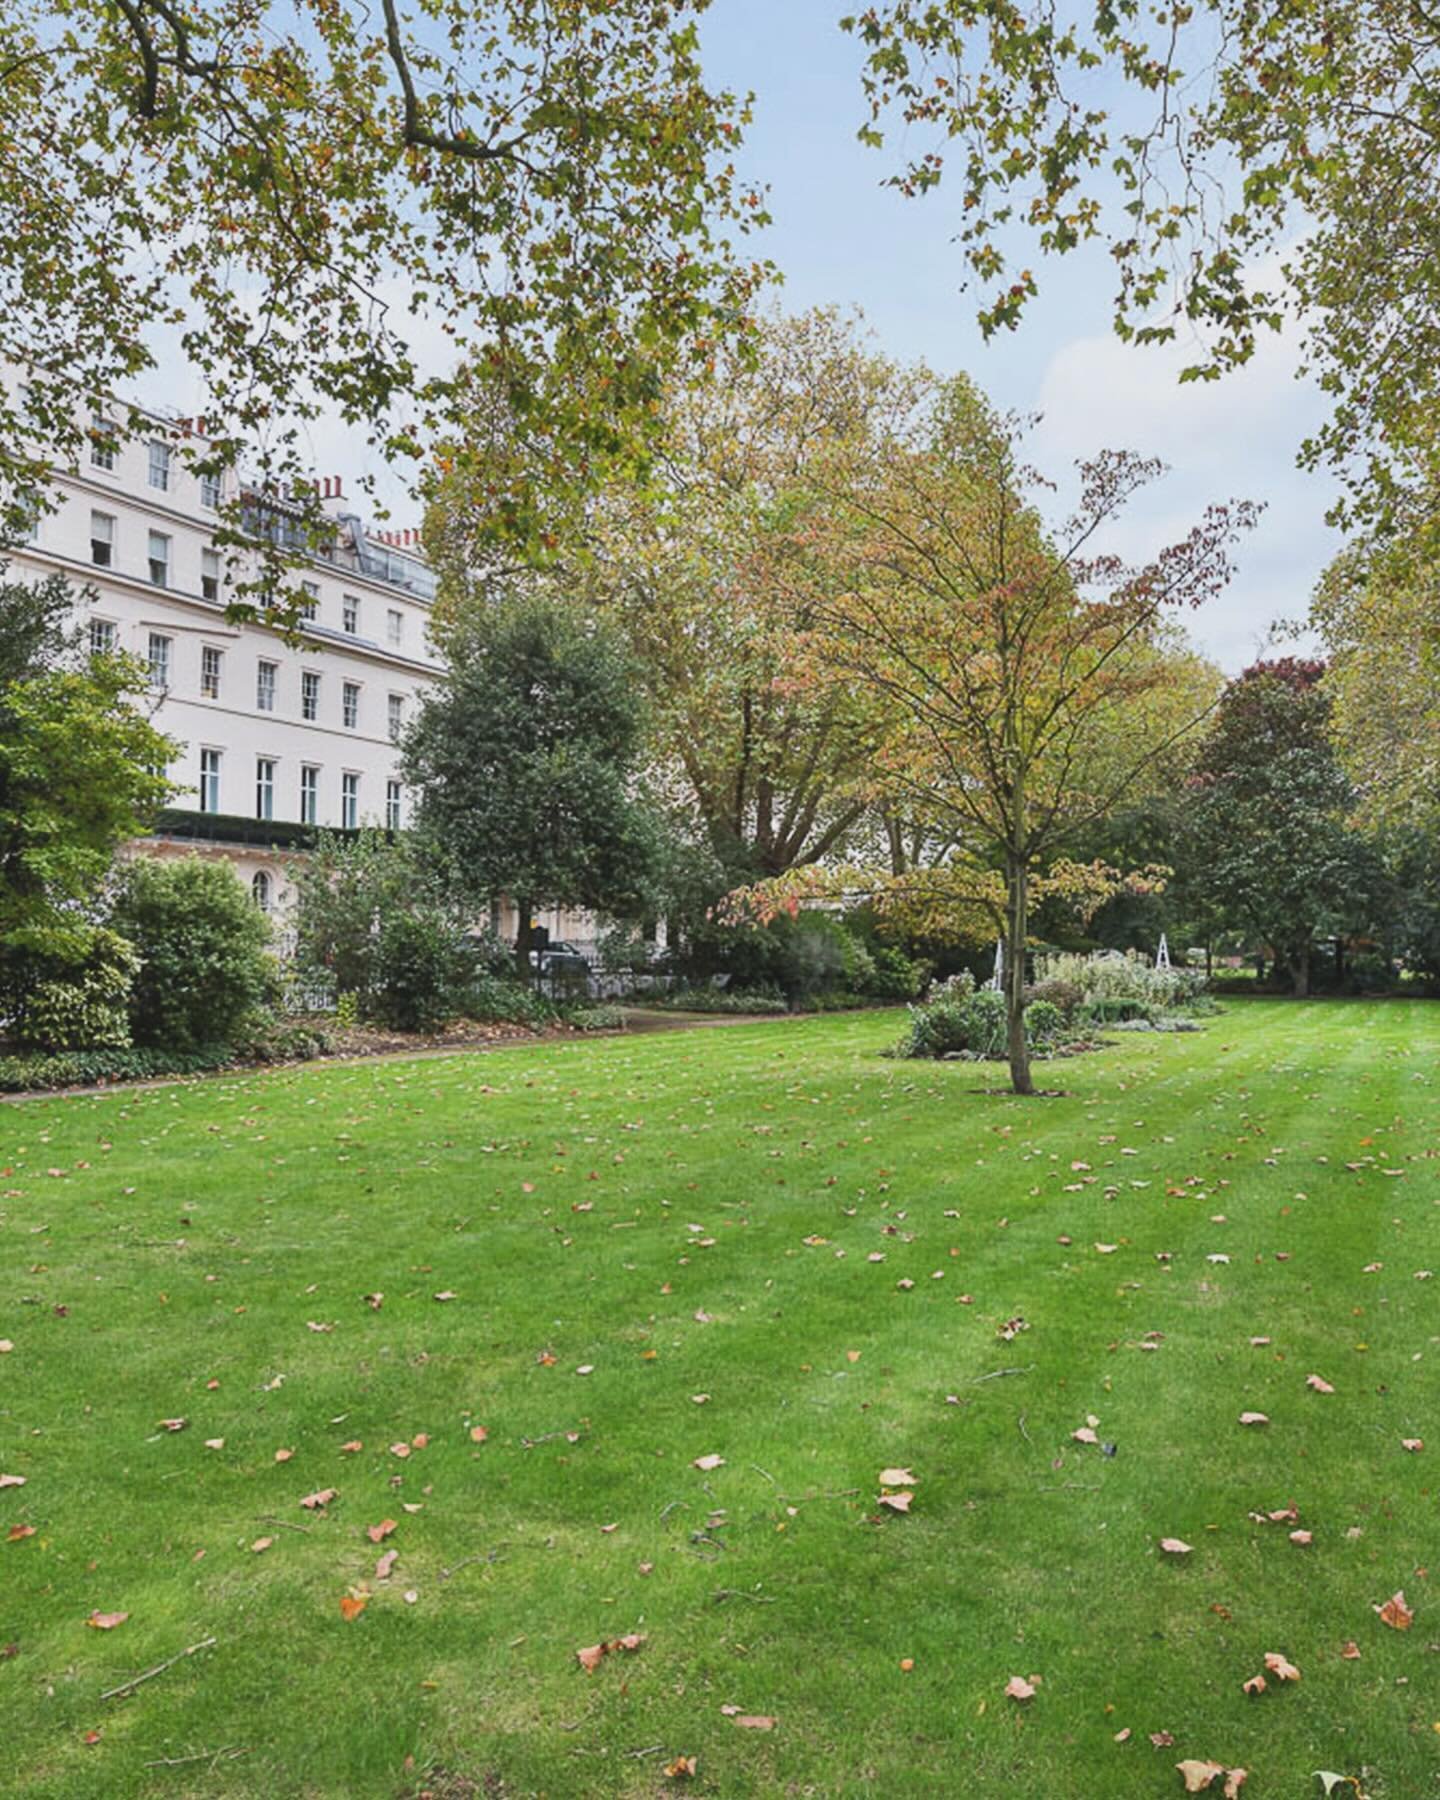 Belgravia is renowned for its beautiful garden squares, including Eaton Square, Belgrave Square and Chester Square. These meticulously landscaped green spaces provide residents some respite from the urban bustle.

The presence of these garden squares